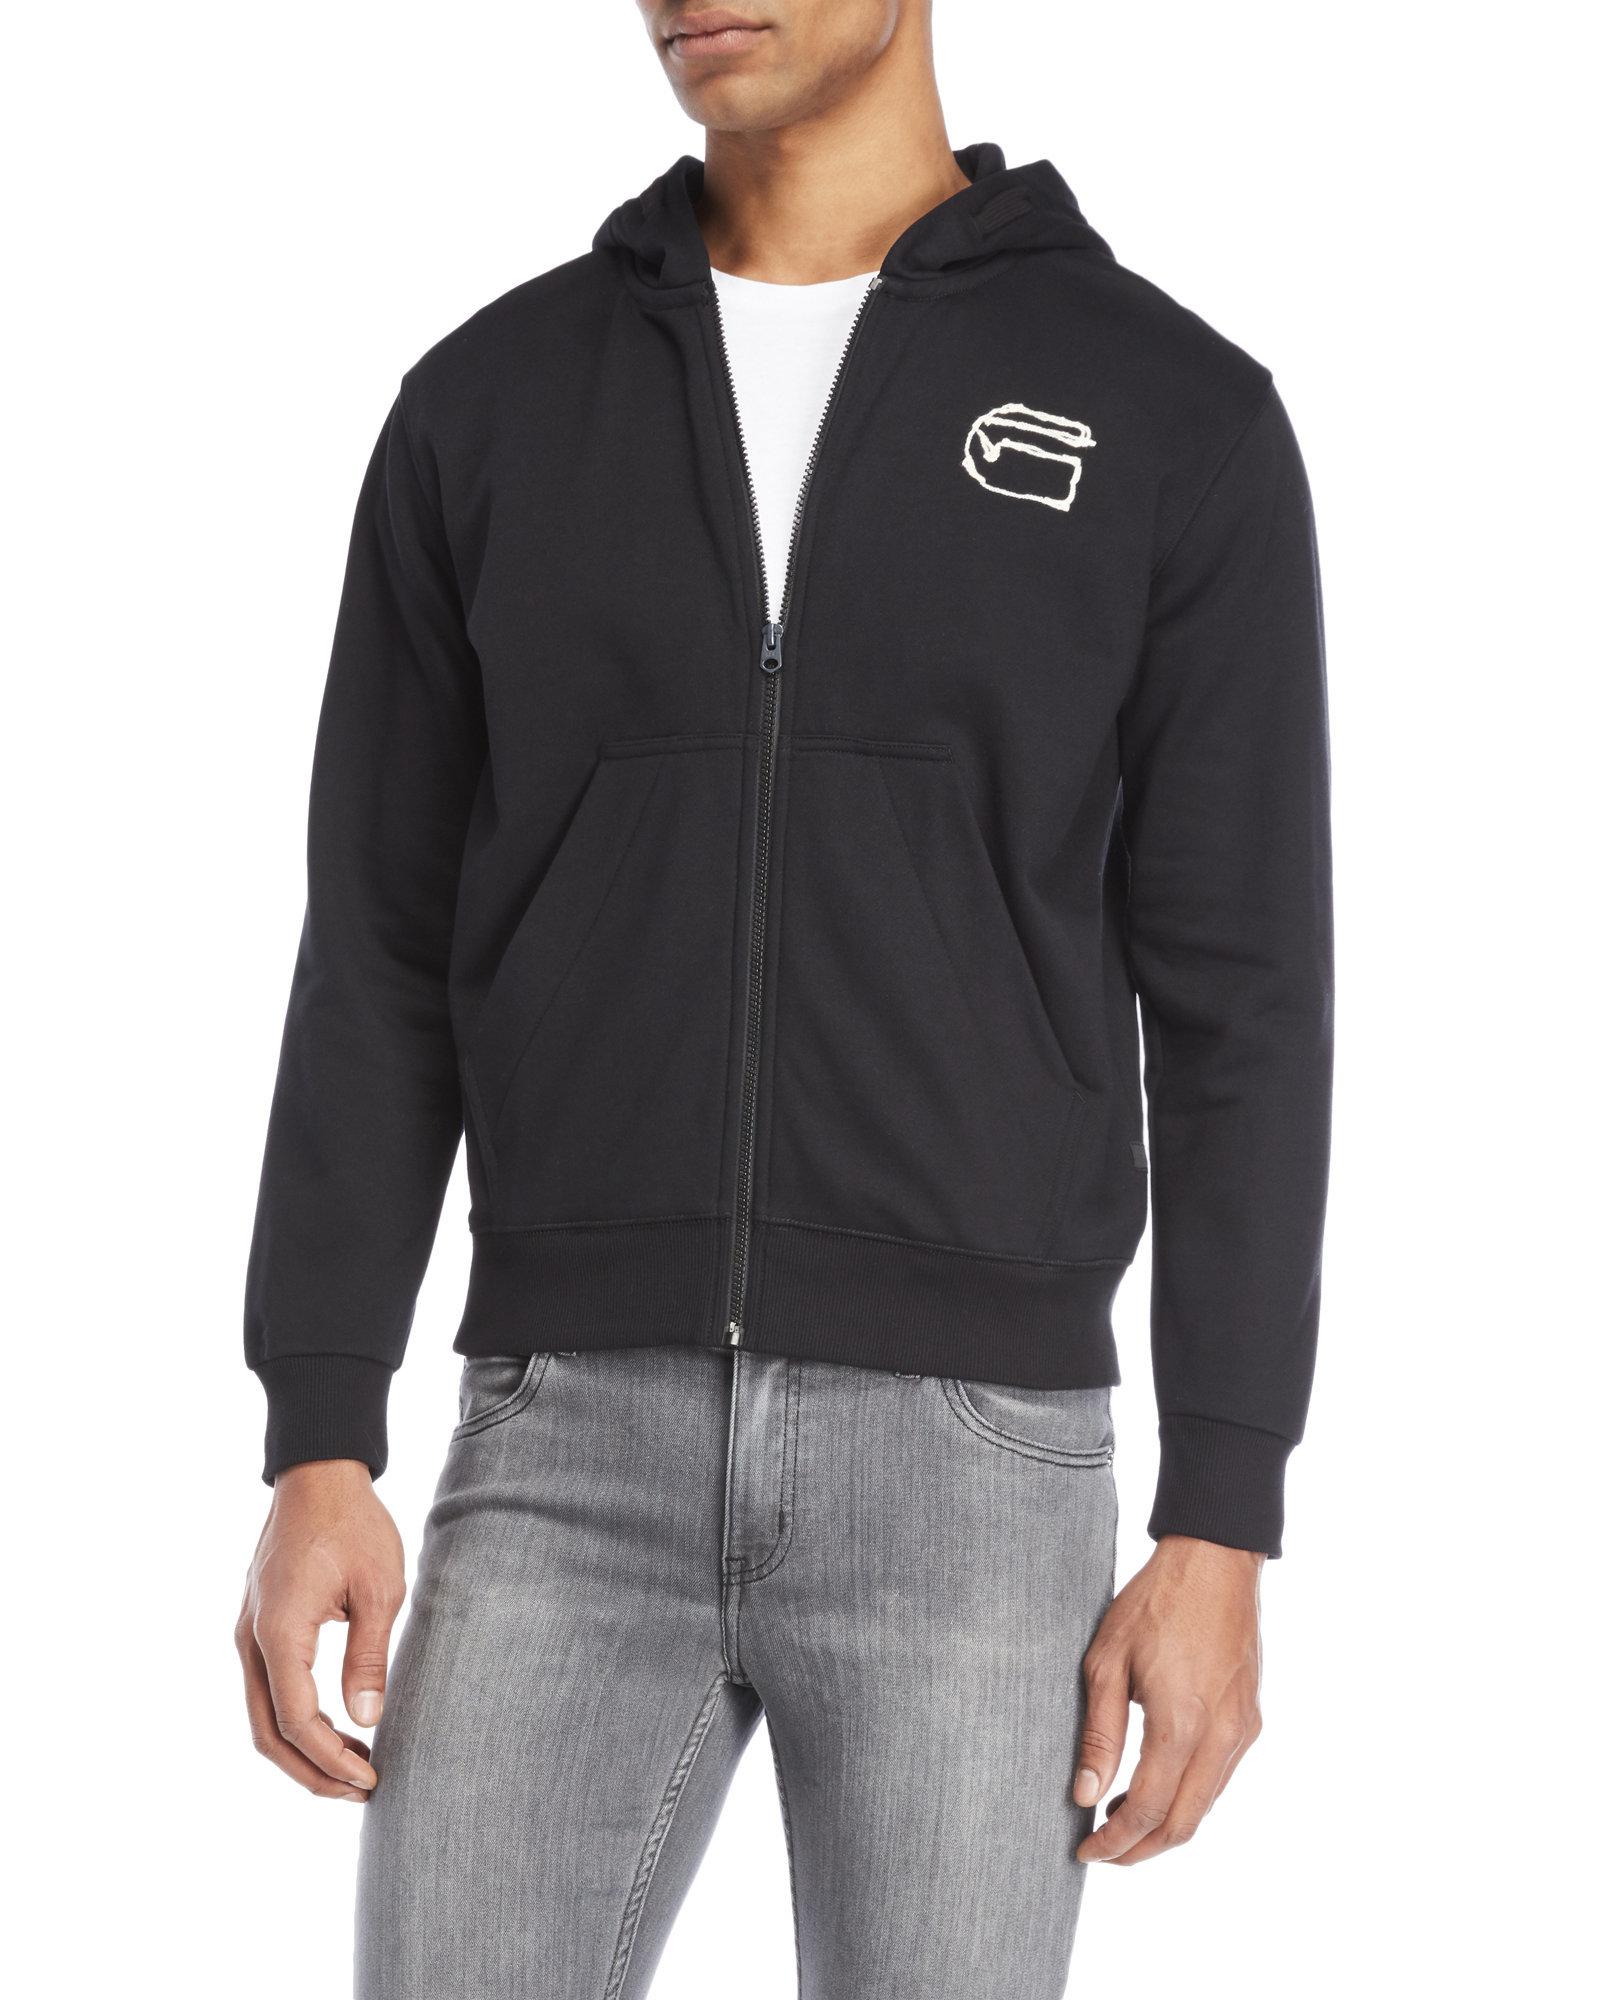 Parity > g star zip up hoodie, Up to 78% OFF